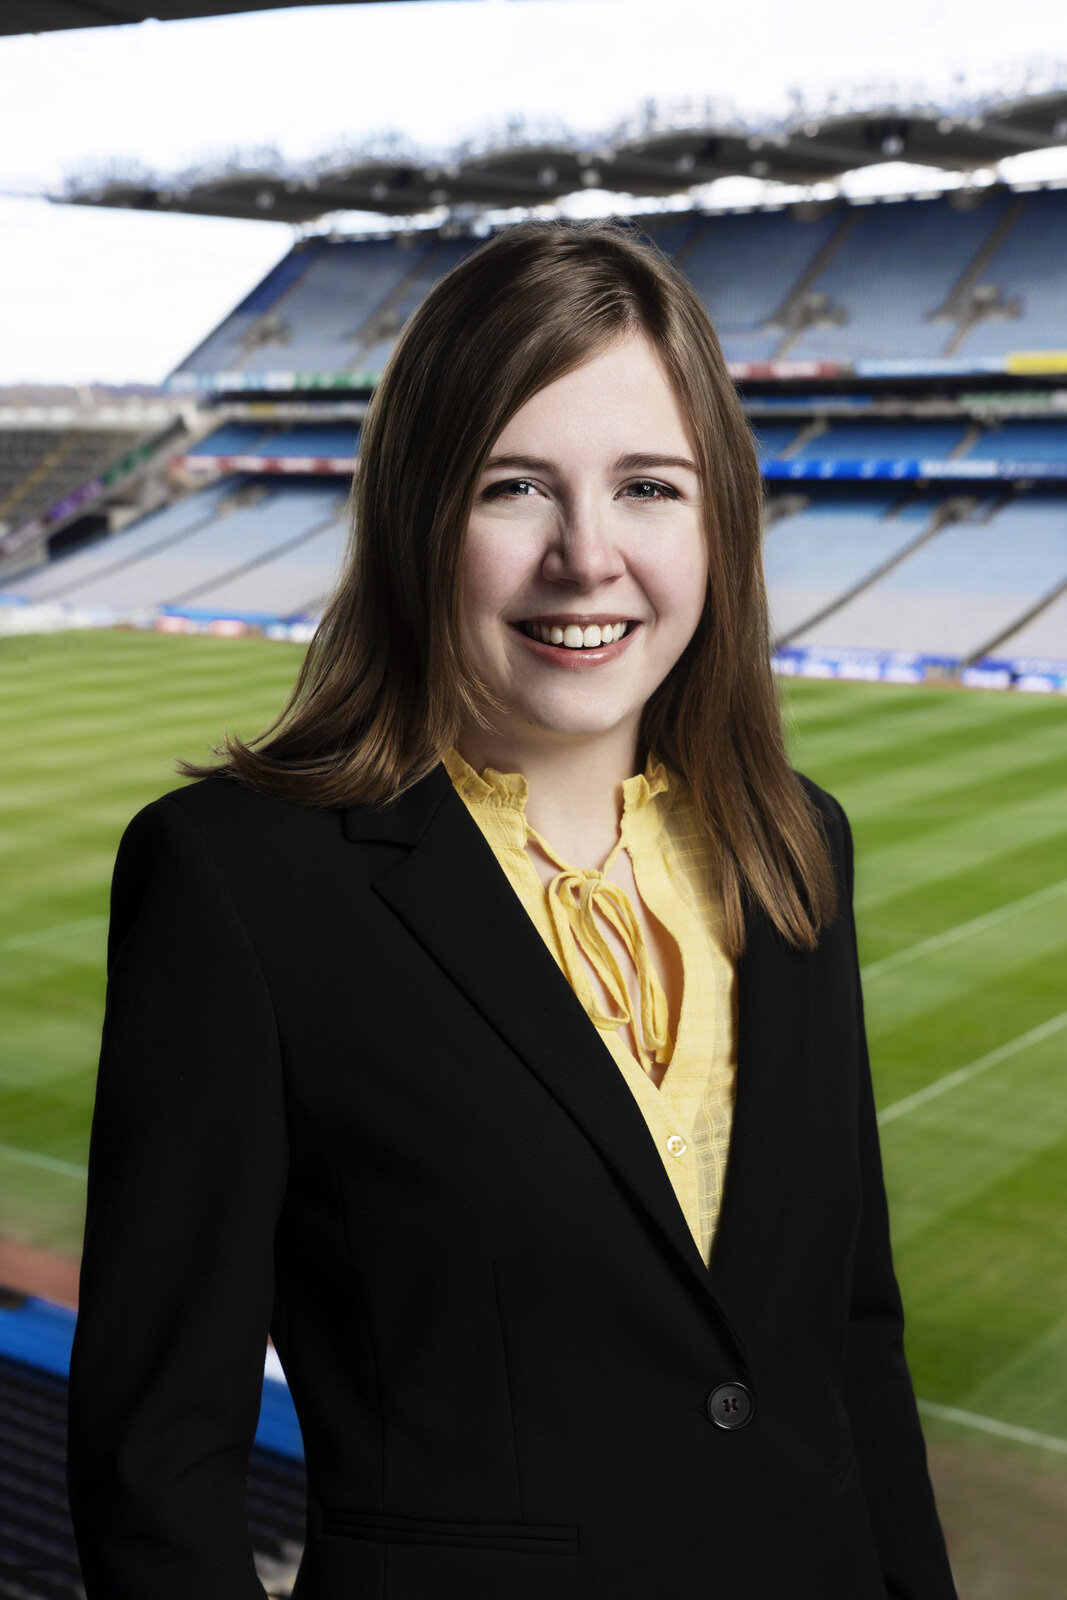  Corporate headshots of Events and Meetings Team Croke Park Dublin Ireland. Roger Kenny Photography.  